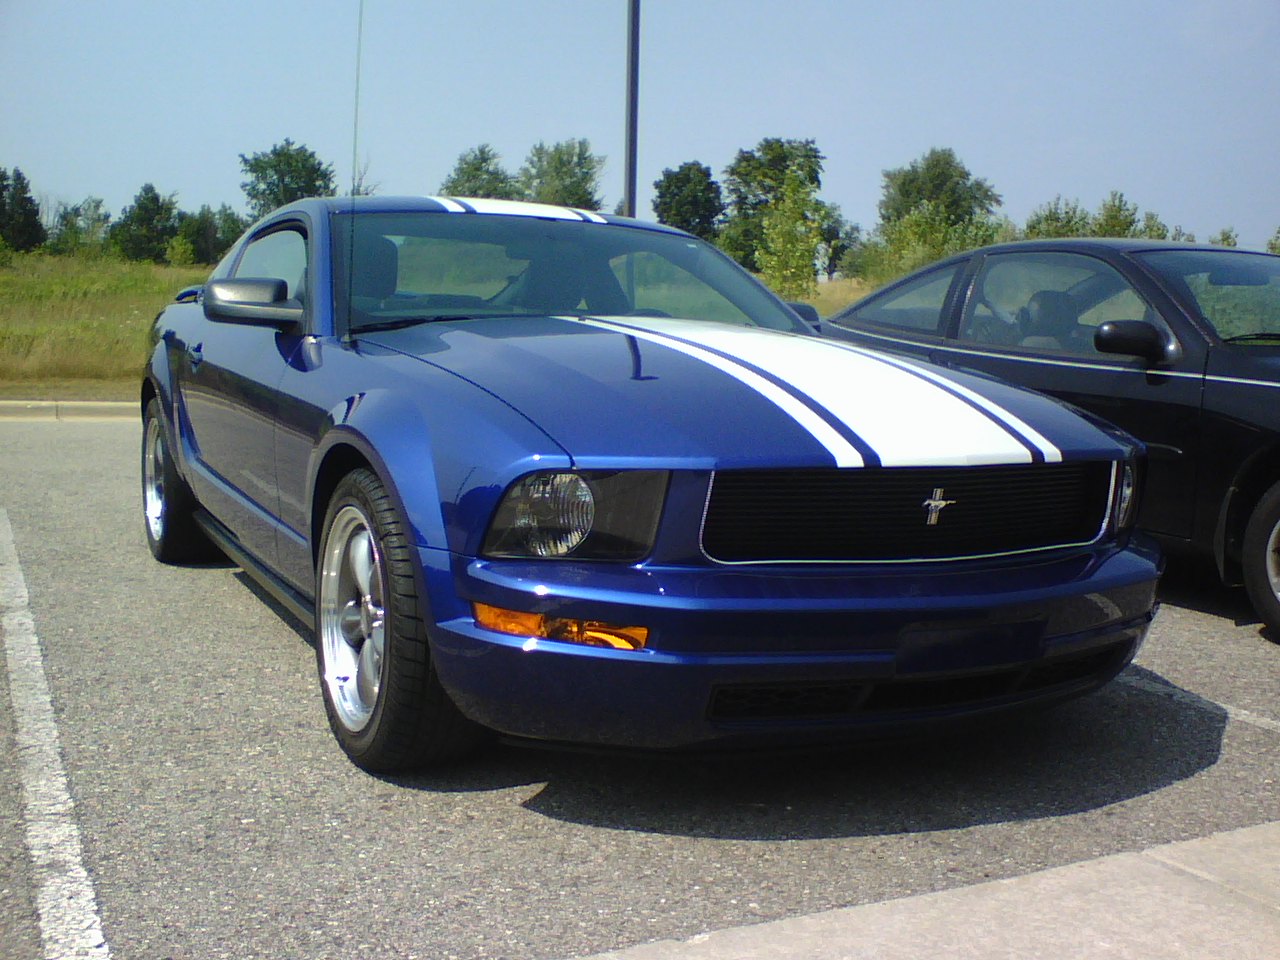 2005 Ford mustang 0-60 times #10